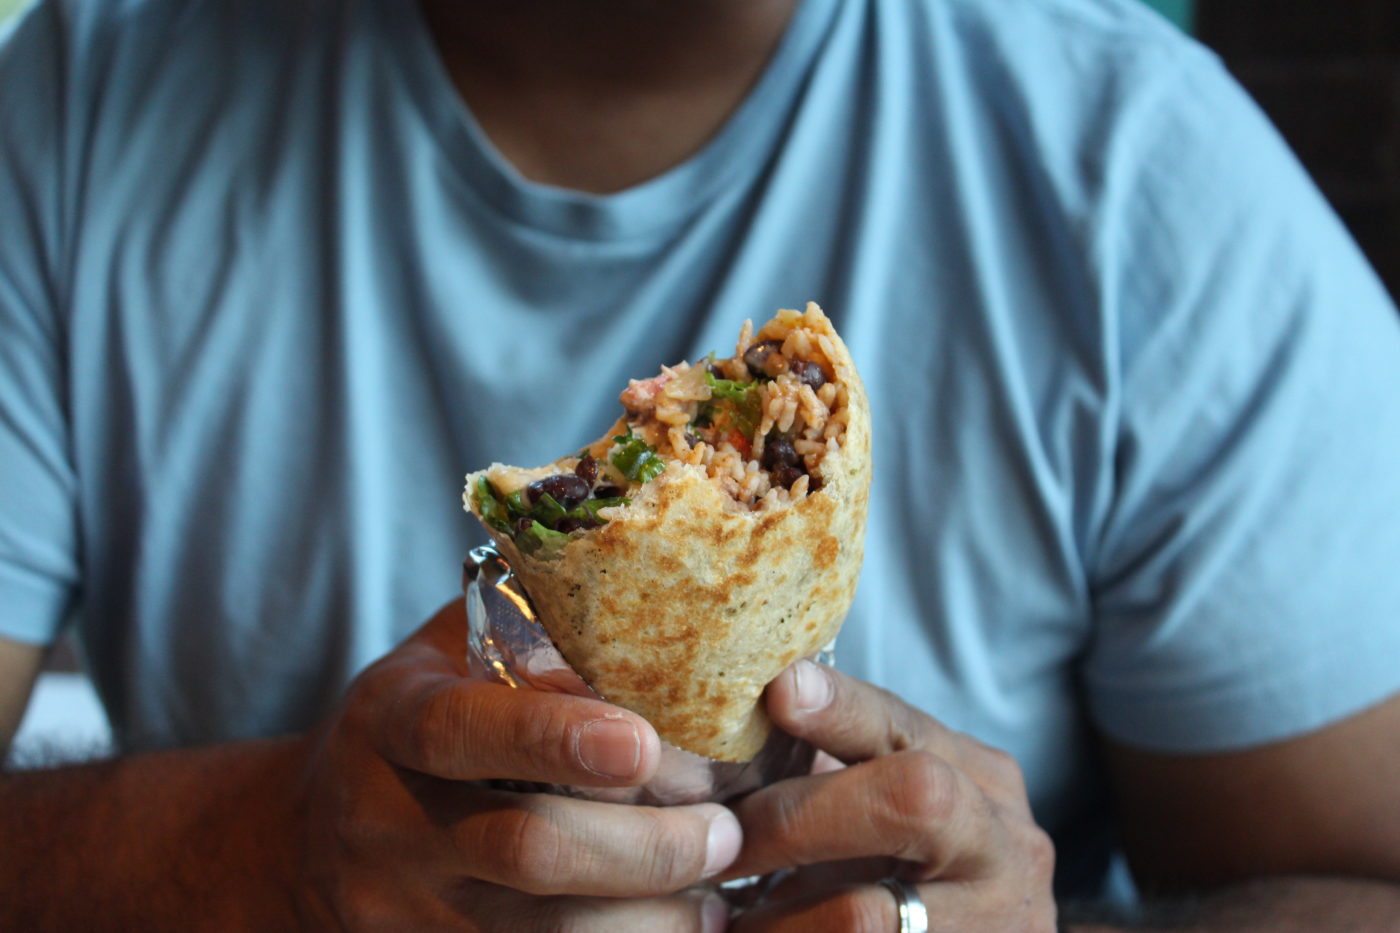 The burritos are filling and puts Chipotle to shame.